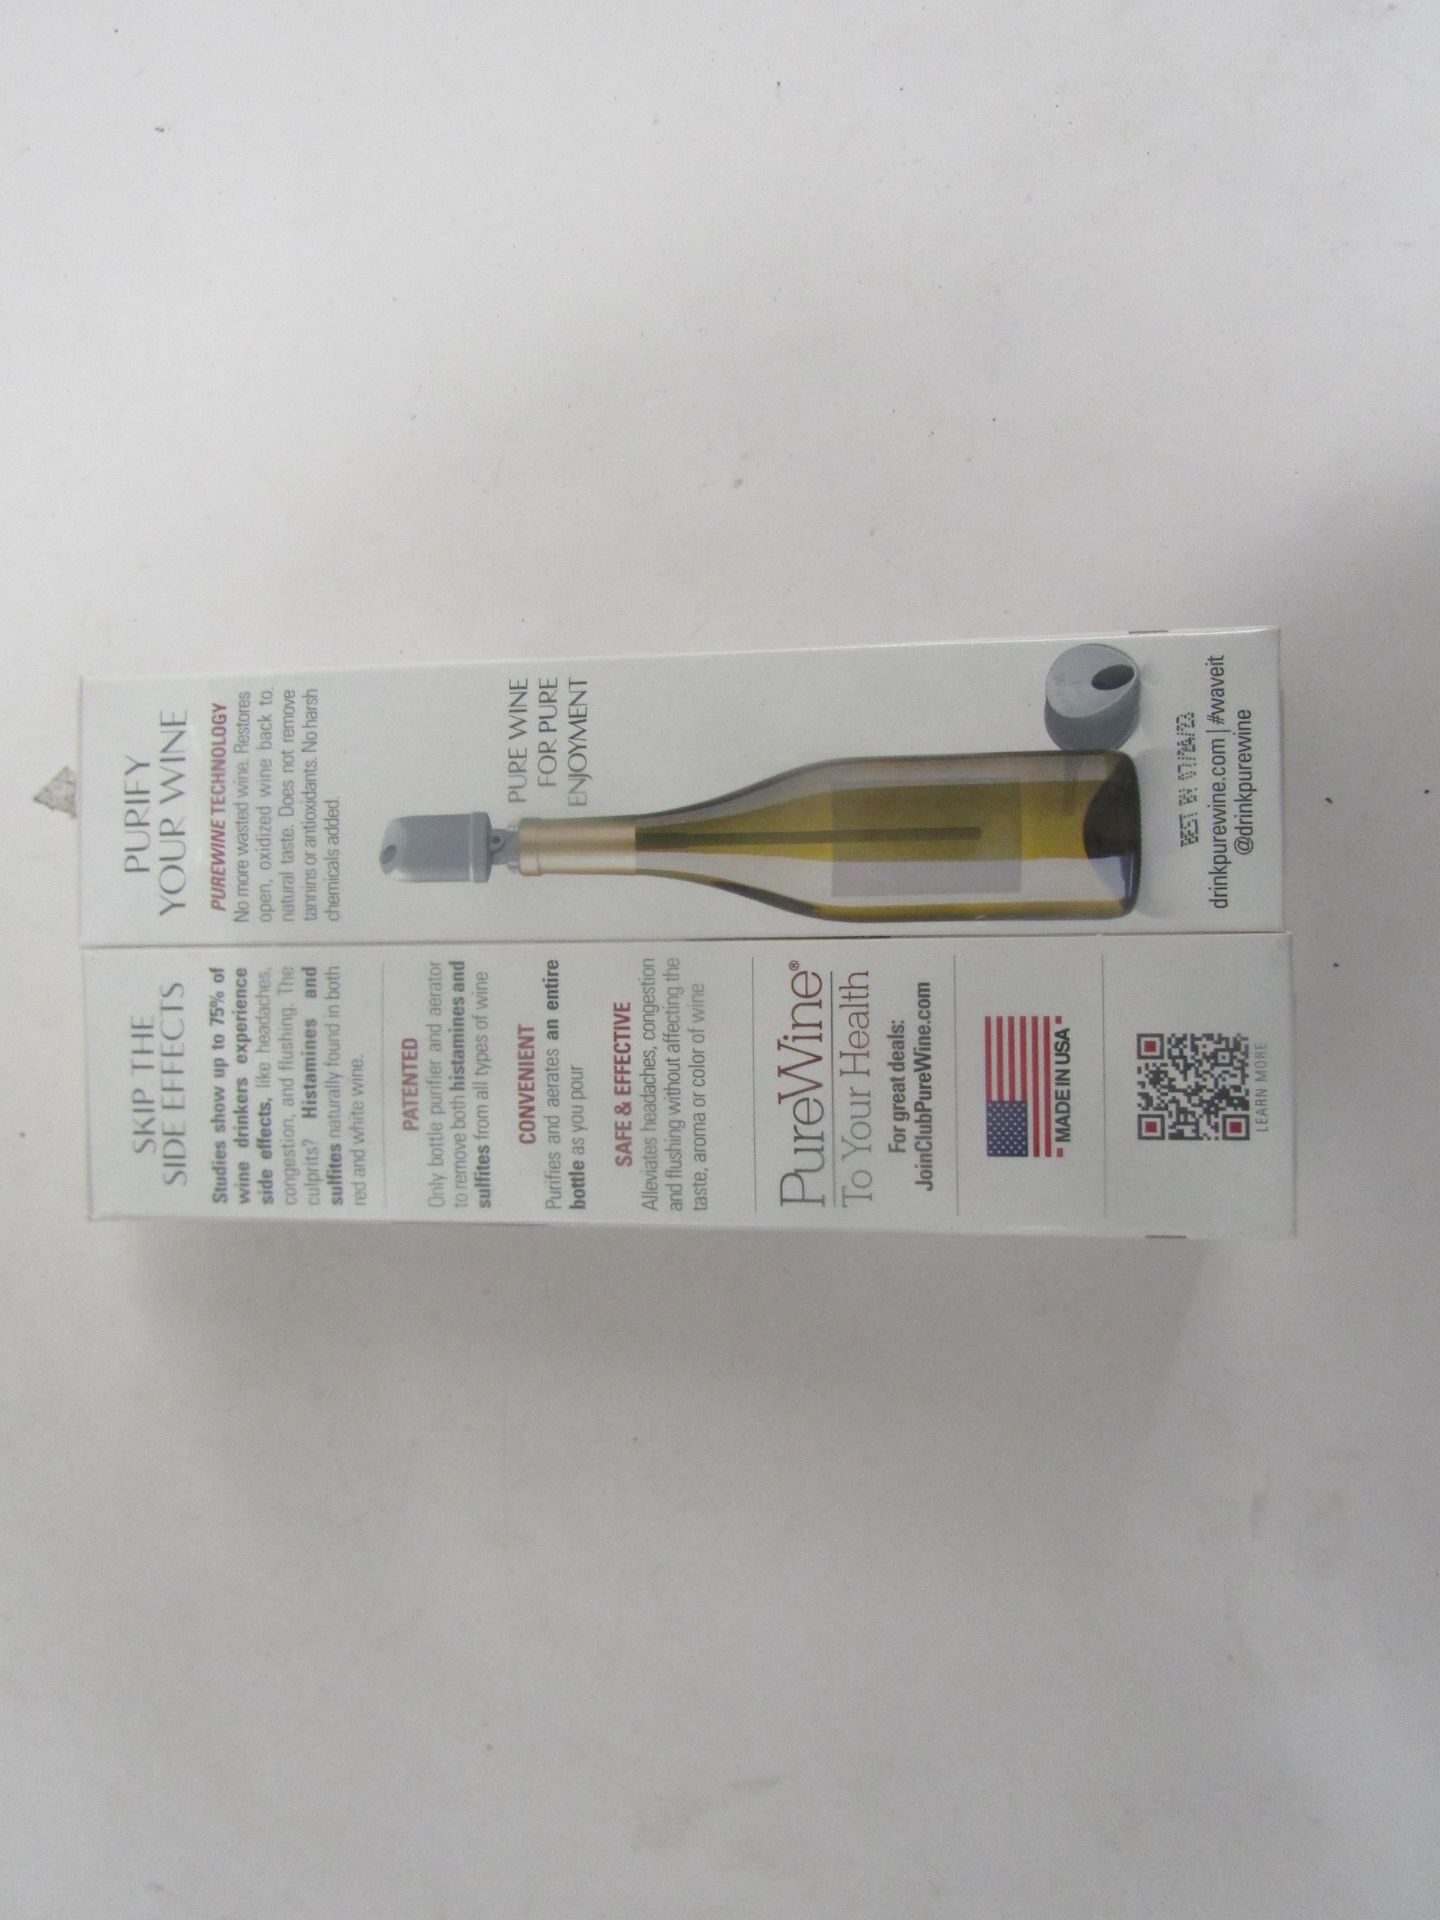 12-Dual Packs (24) of TheWave - Wine Purifiier & Aerator - Cures Hangovers. New & Boxed.